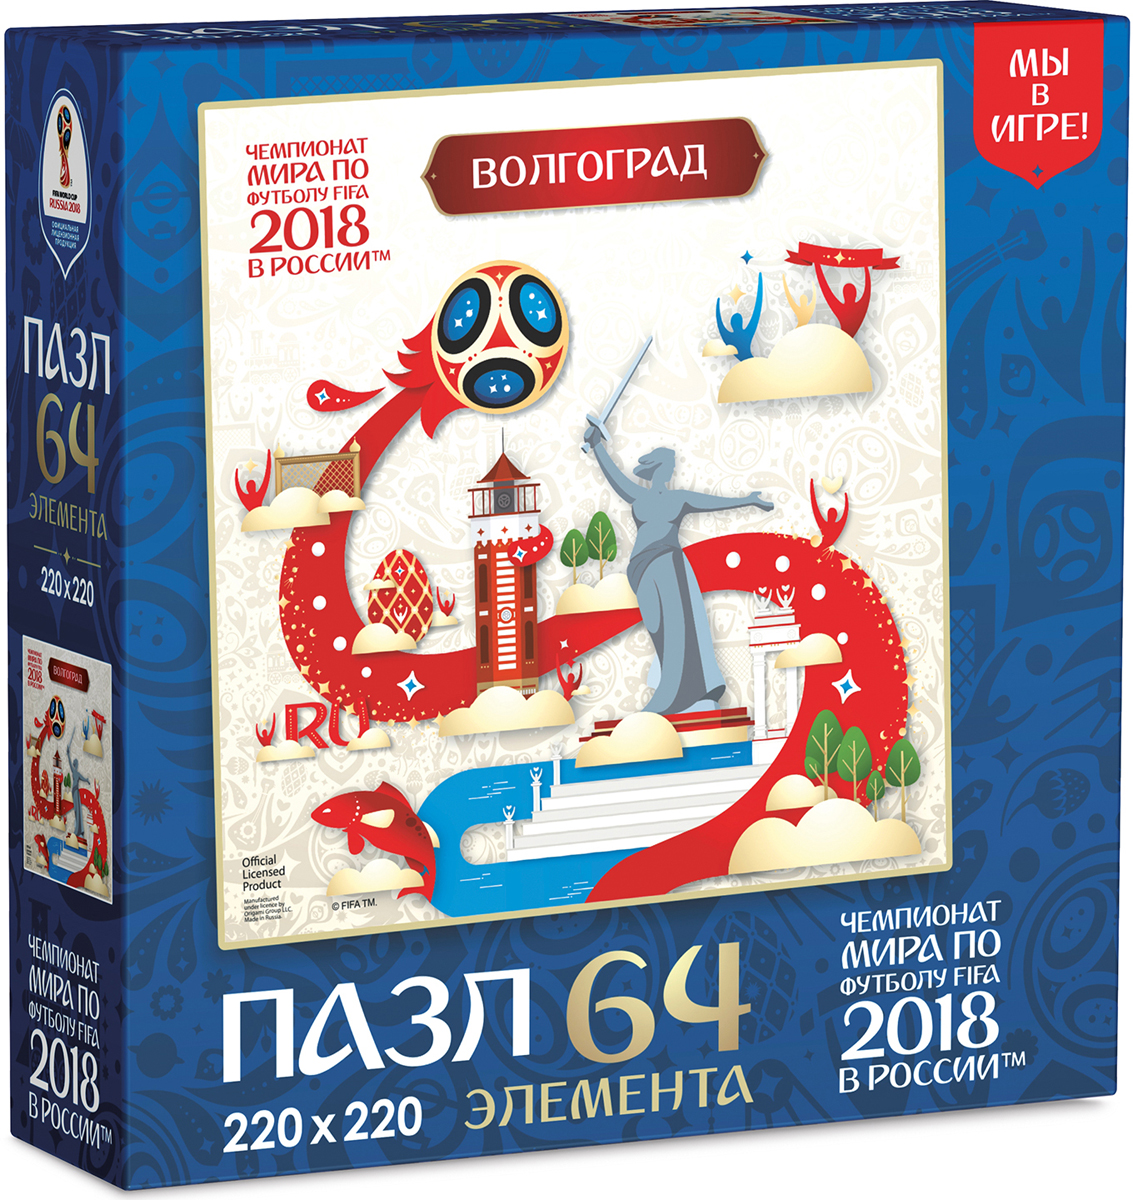 FIFA World Cup Russia 2018 Пазл Look Волгоград 03873